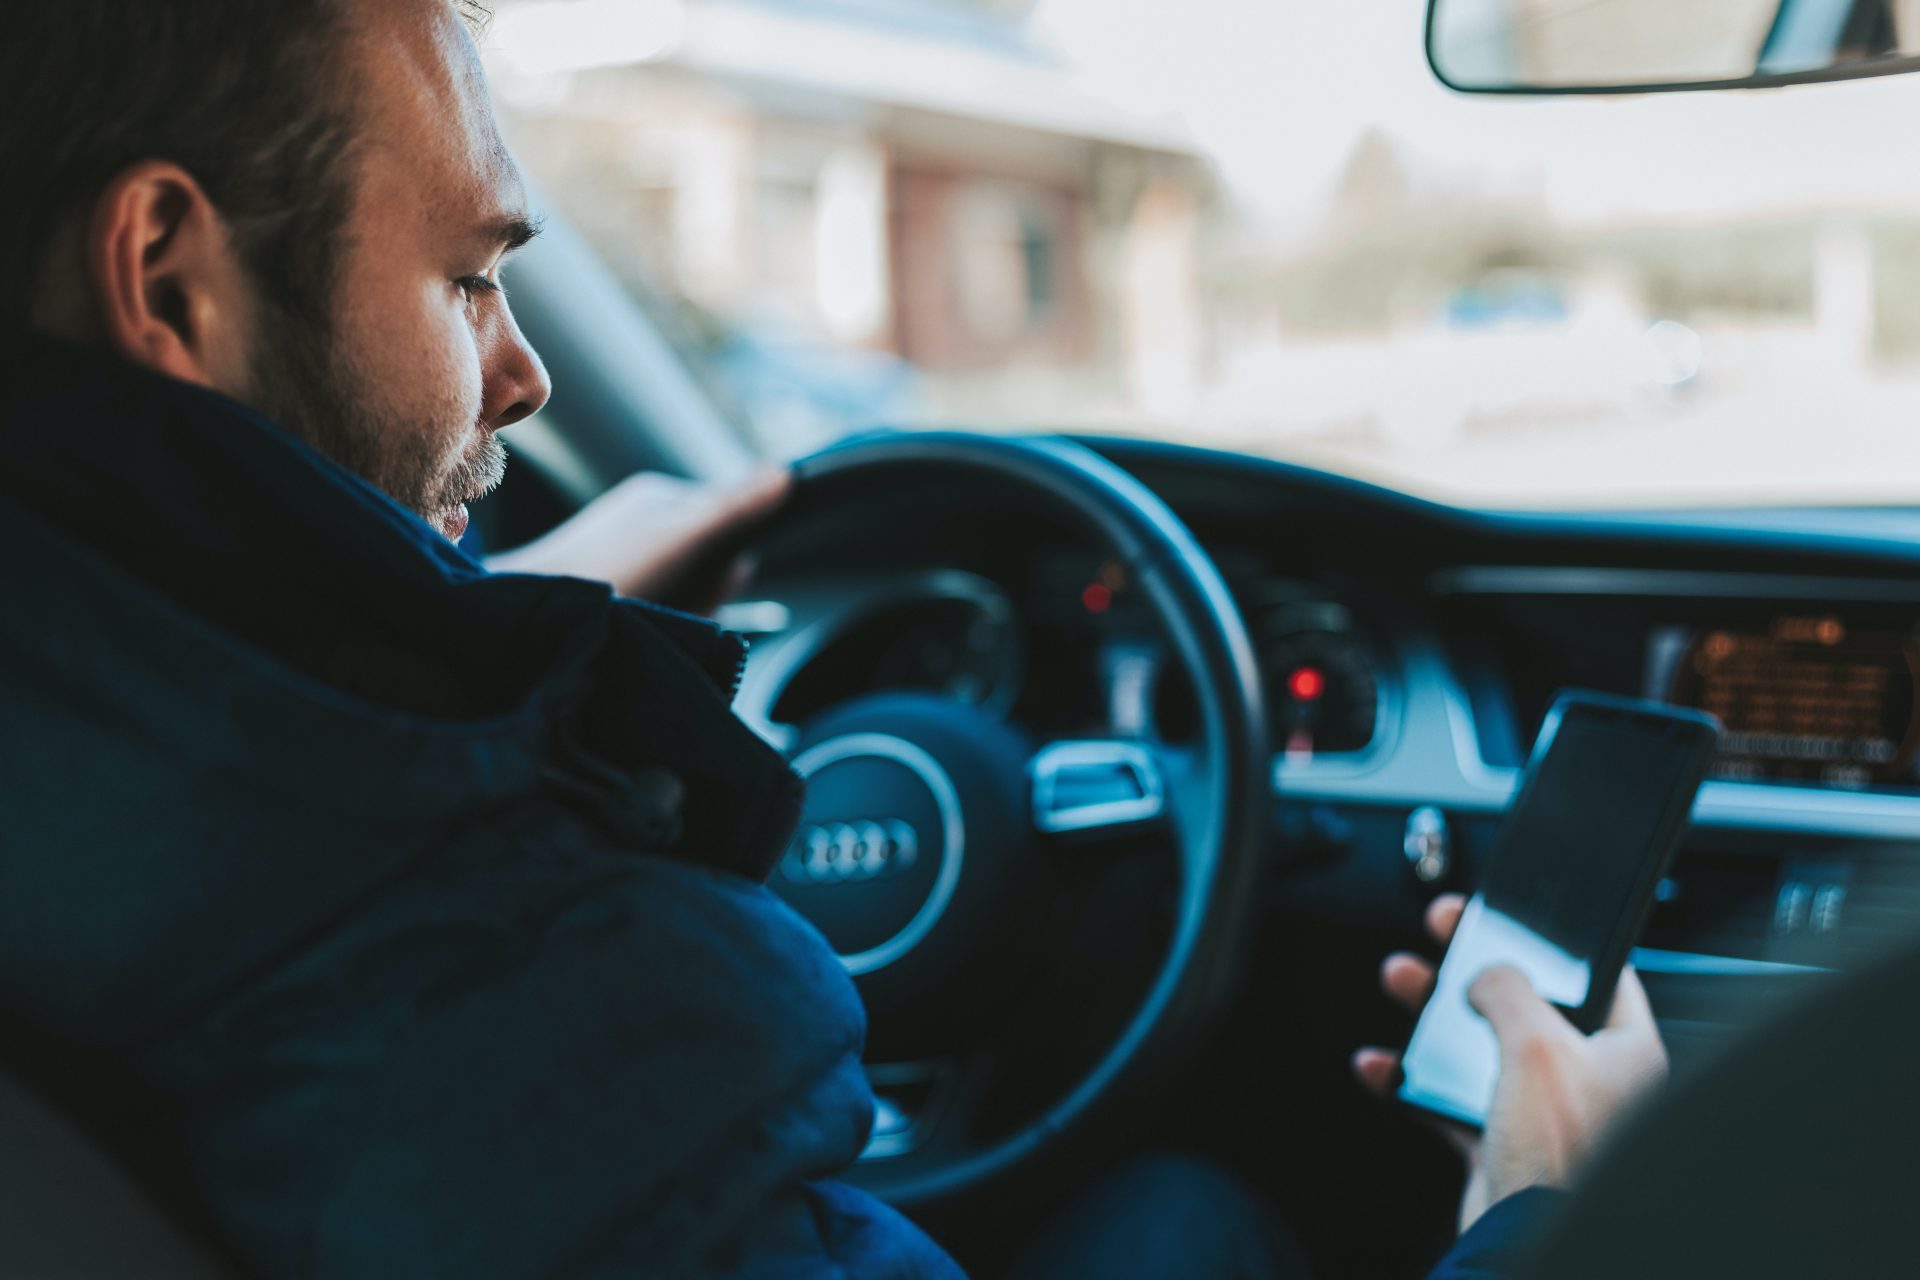 Distracted Driving Cell Phone Law Effectiveness One Month After Passage